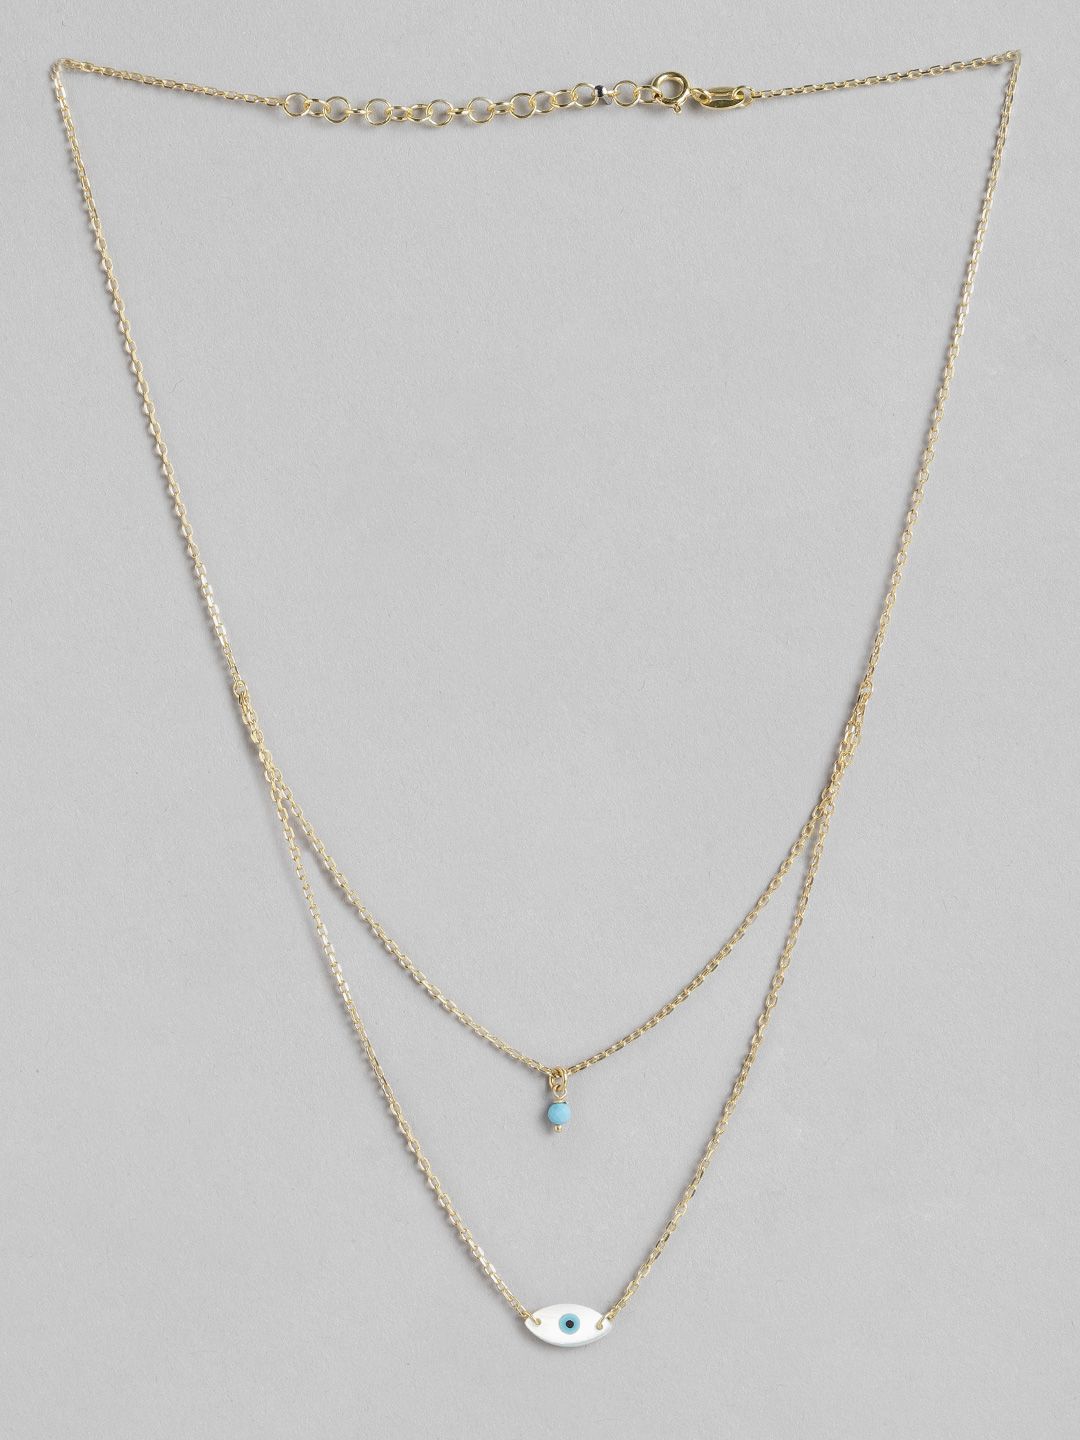 Carlton London Gold-Plated & Turquoise Blue Brass Layered Necklace Price in India